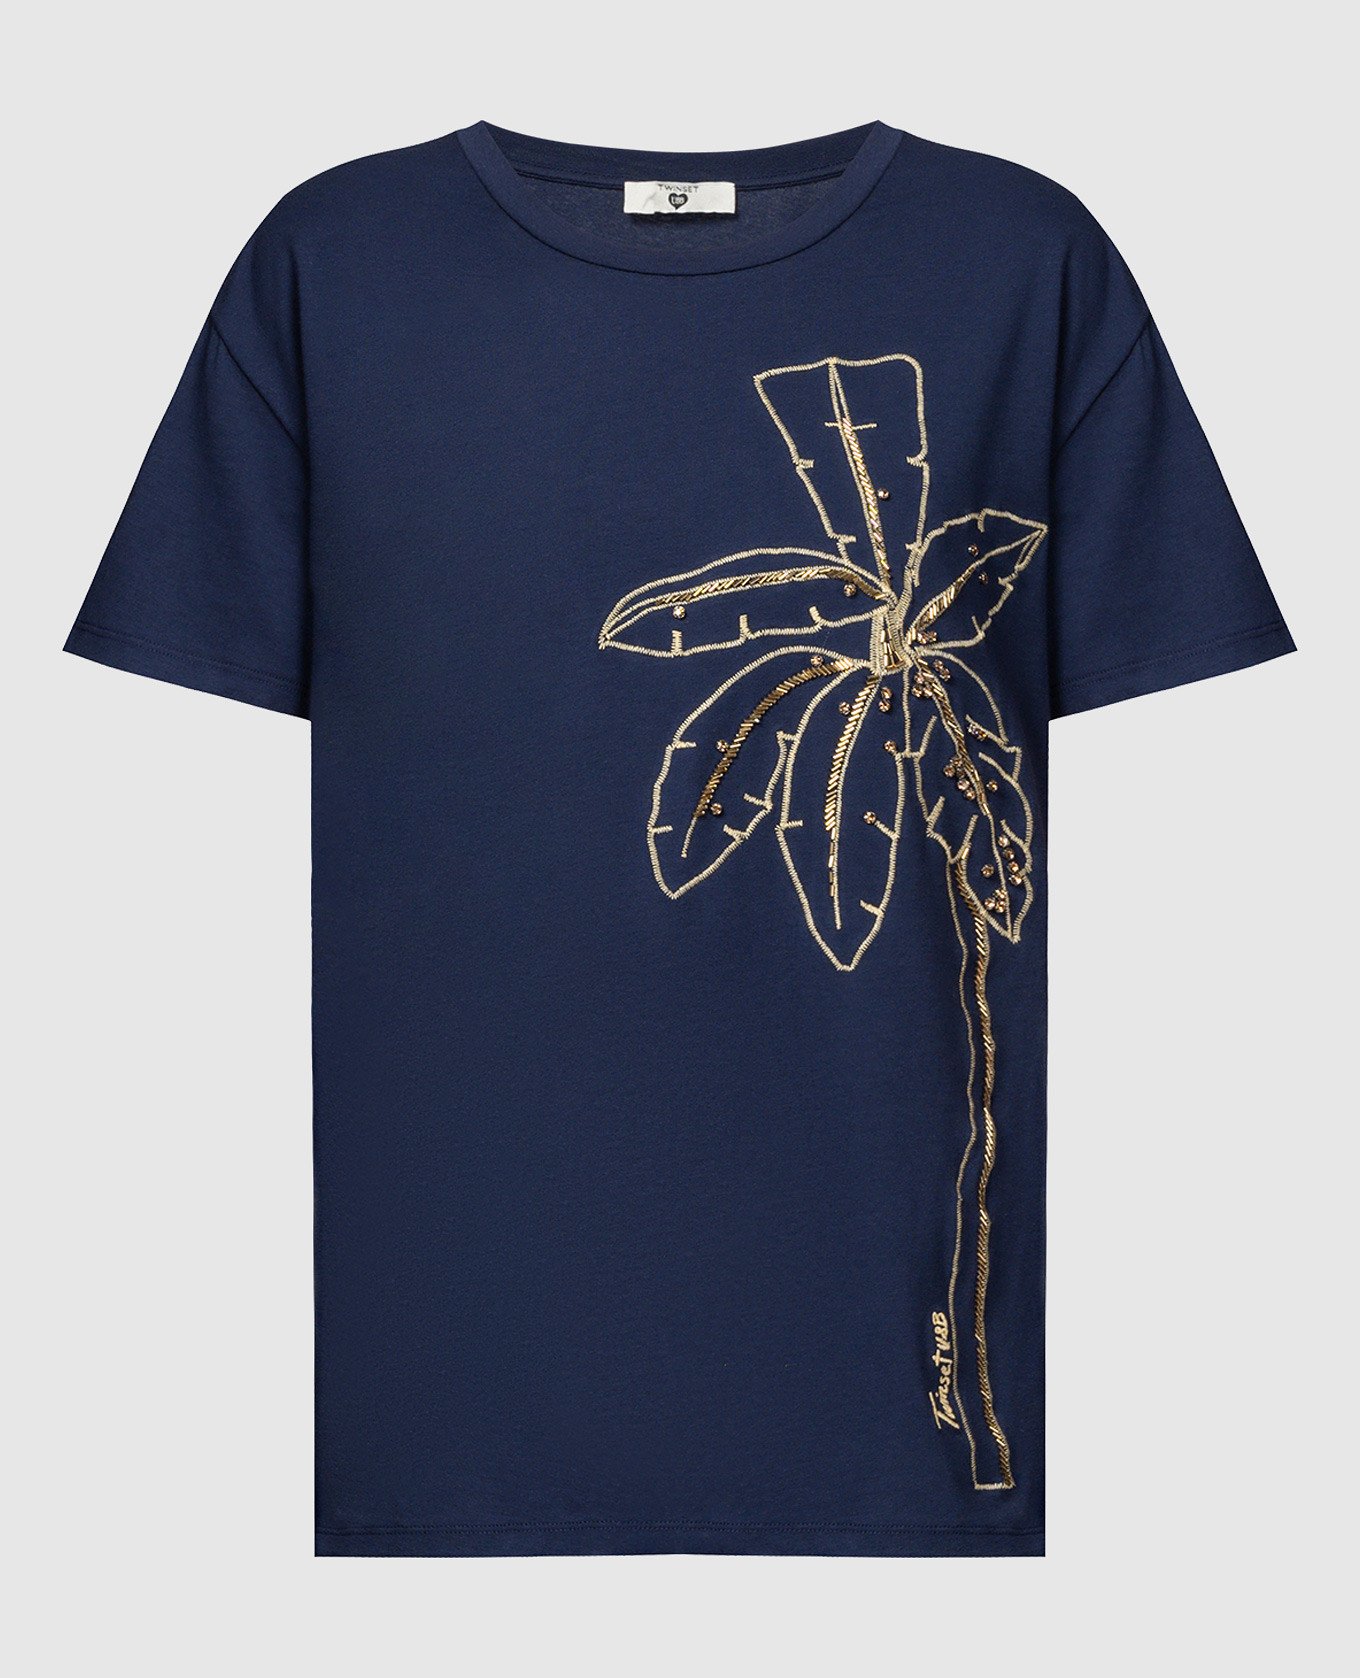 Blue T-shirt with embroidery